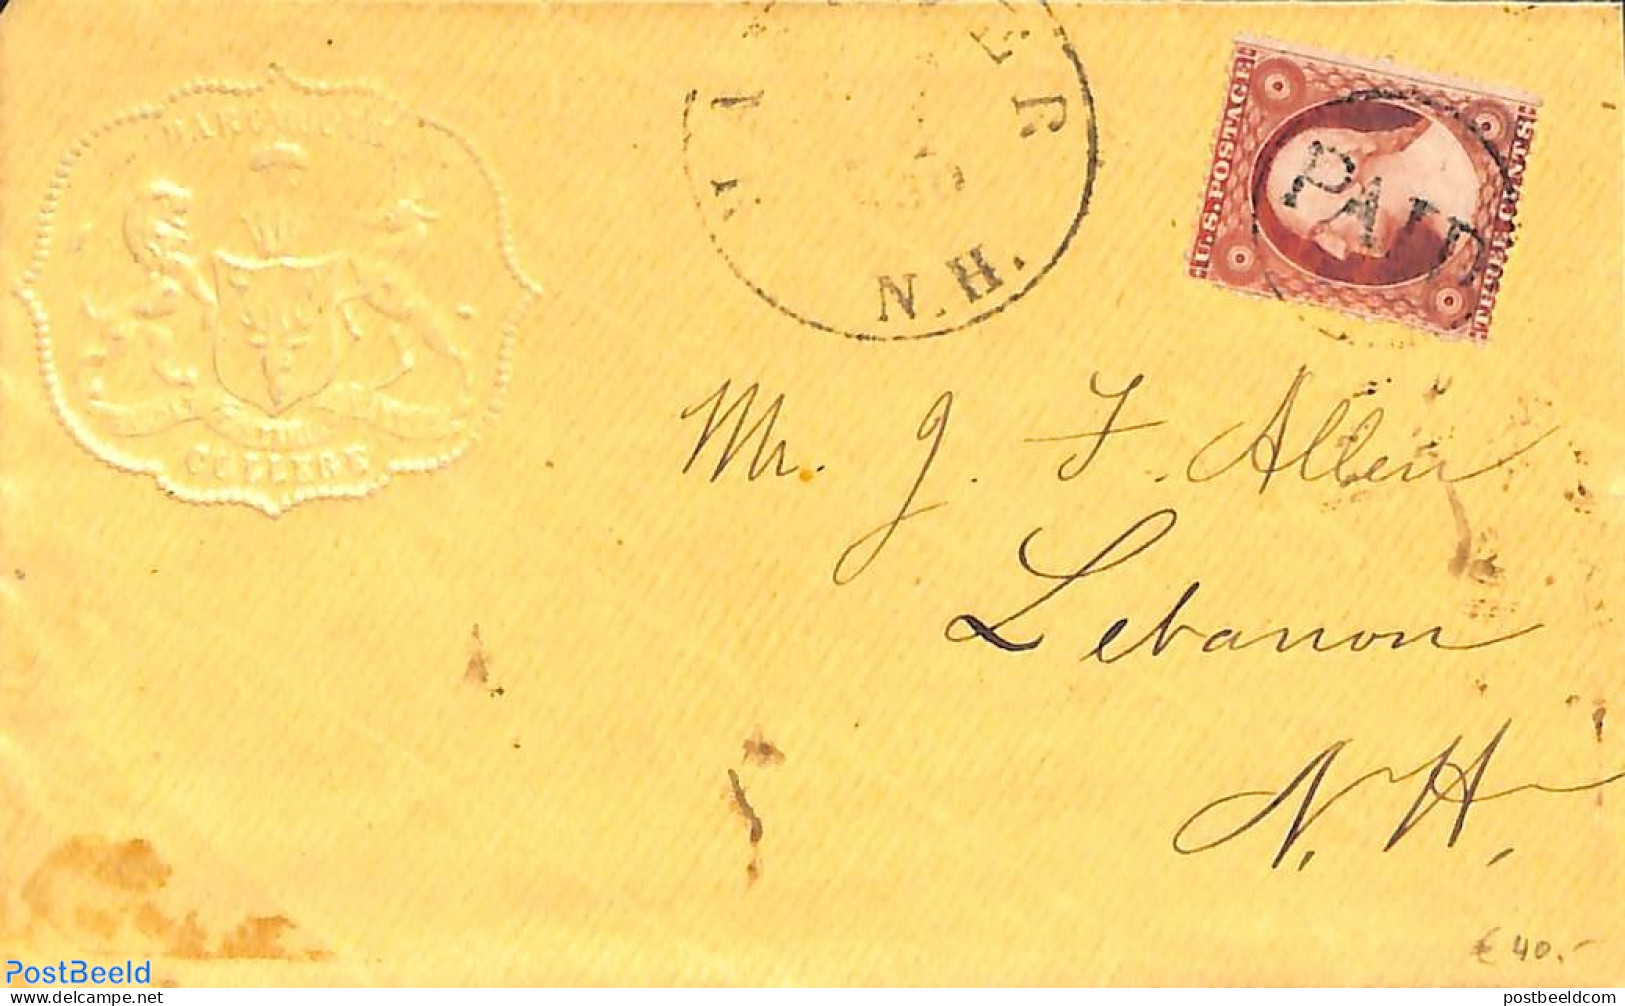 United States Of America 1860 Letter To Lebanon, Postal History - Lettres & Documents